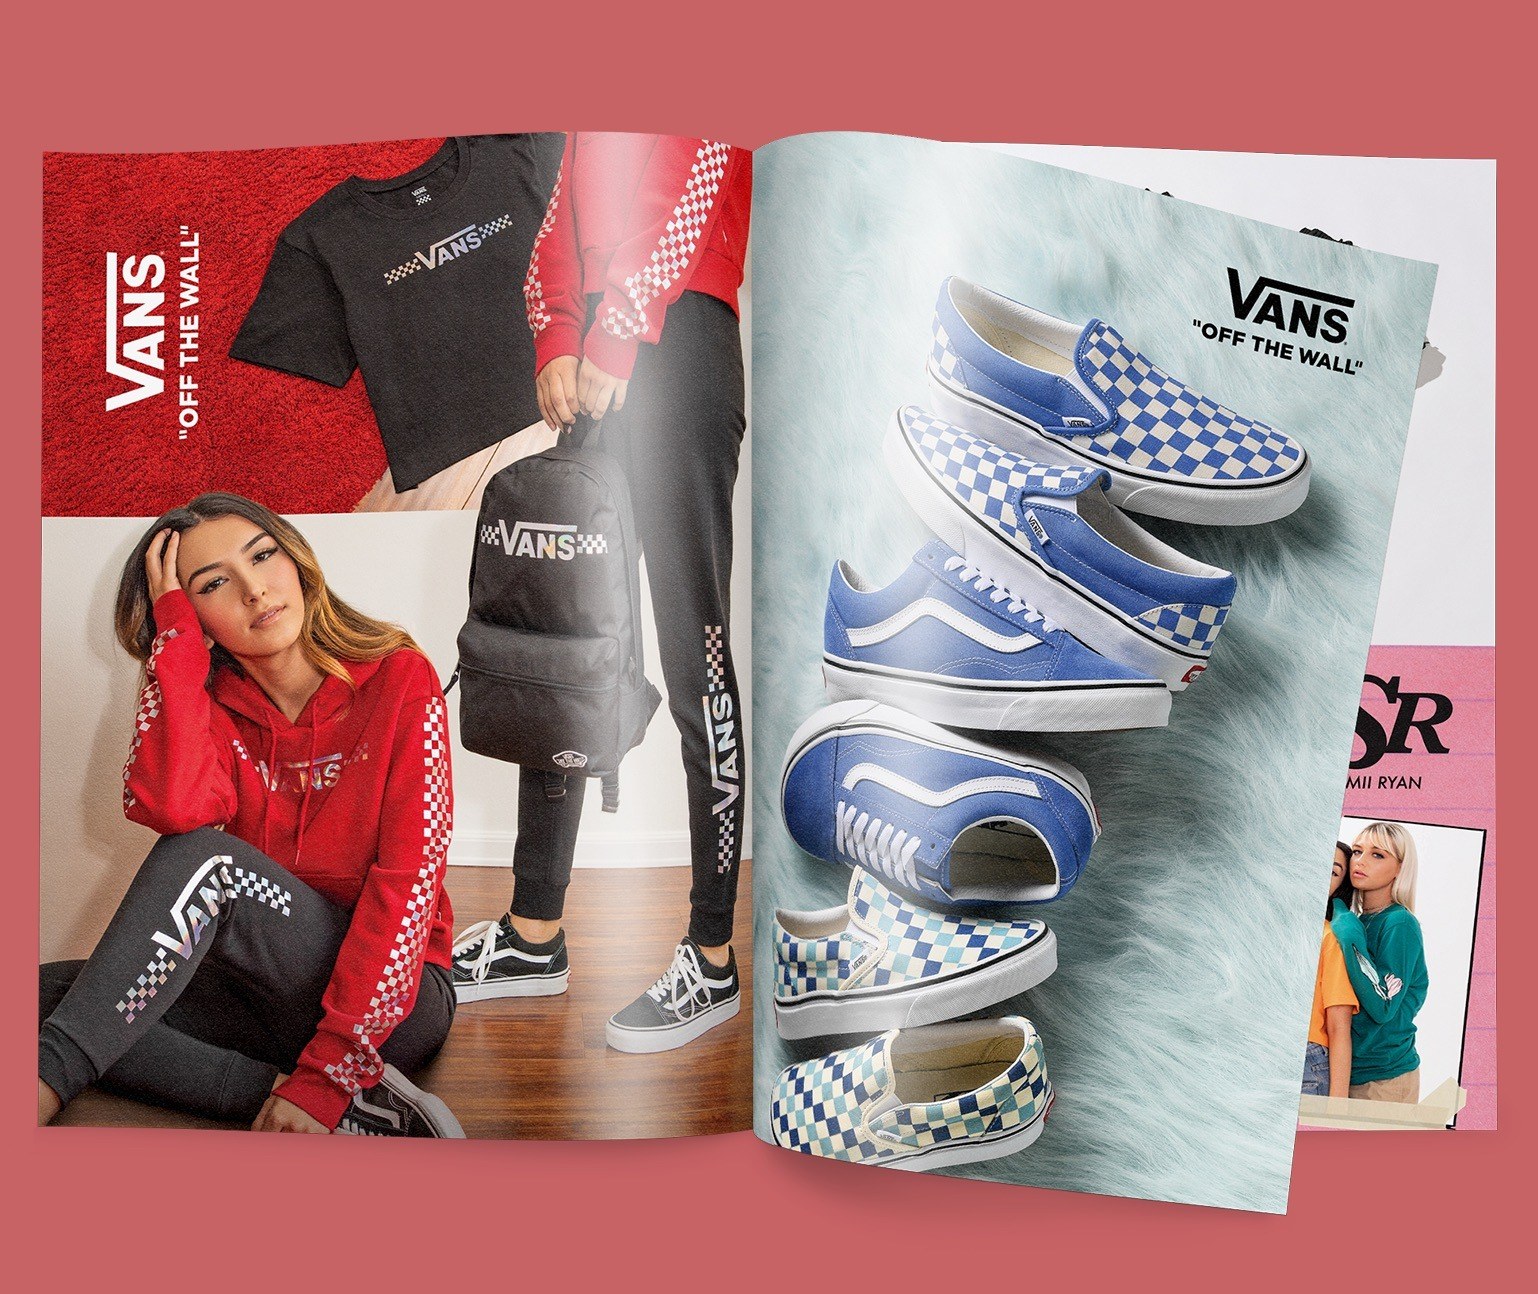 Catalog spread with one page turning, on a pink background. Pages show woman wearing a Vans sweatshirt, carrying a Vans backpack, in addition to three pairs of blue Vans shoes.